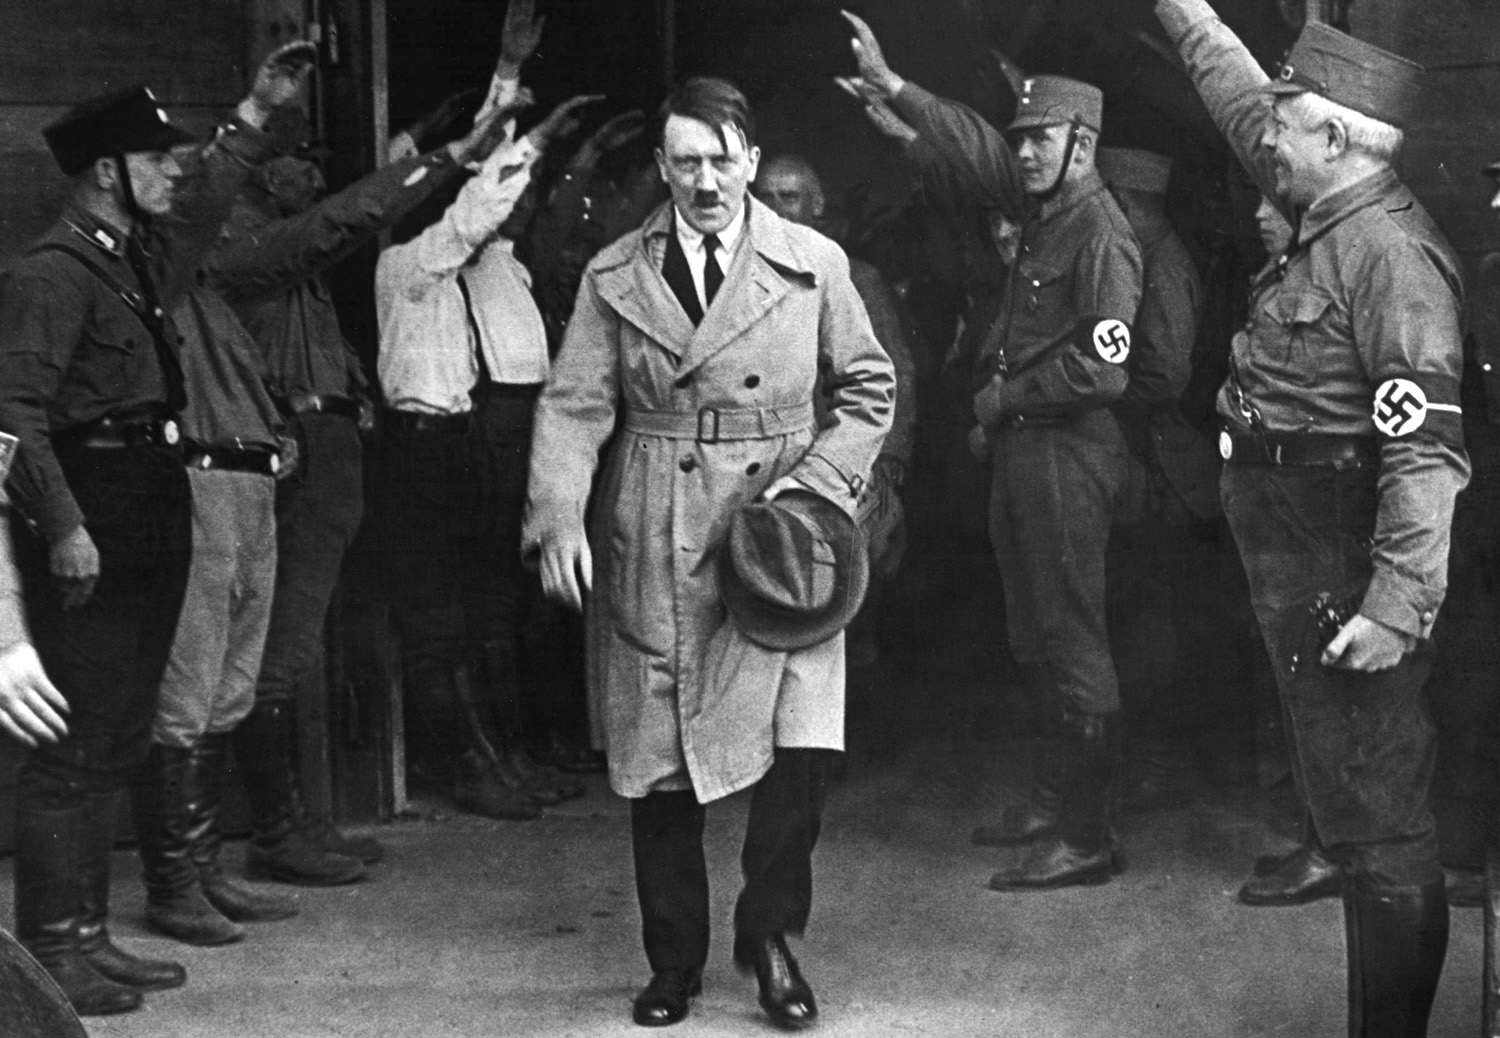 Adolf Hitler, leader of the National Socialists, emerges from the party's Munich headquarters on December 5, 1931.  Hitler predicted his Nazi party would one day control Germany. (AP Photo)